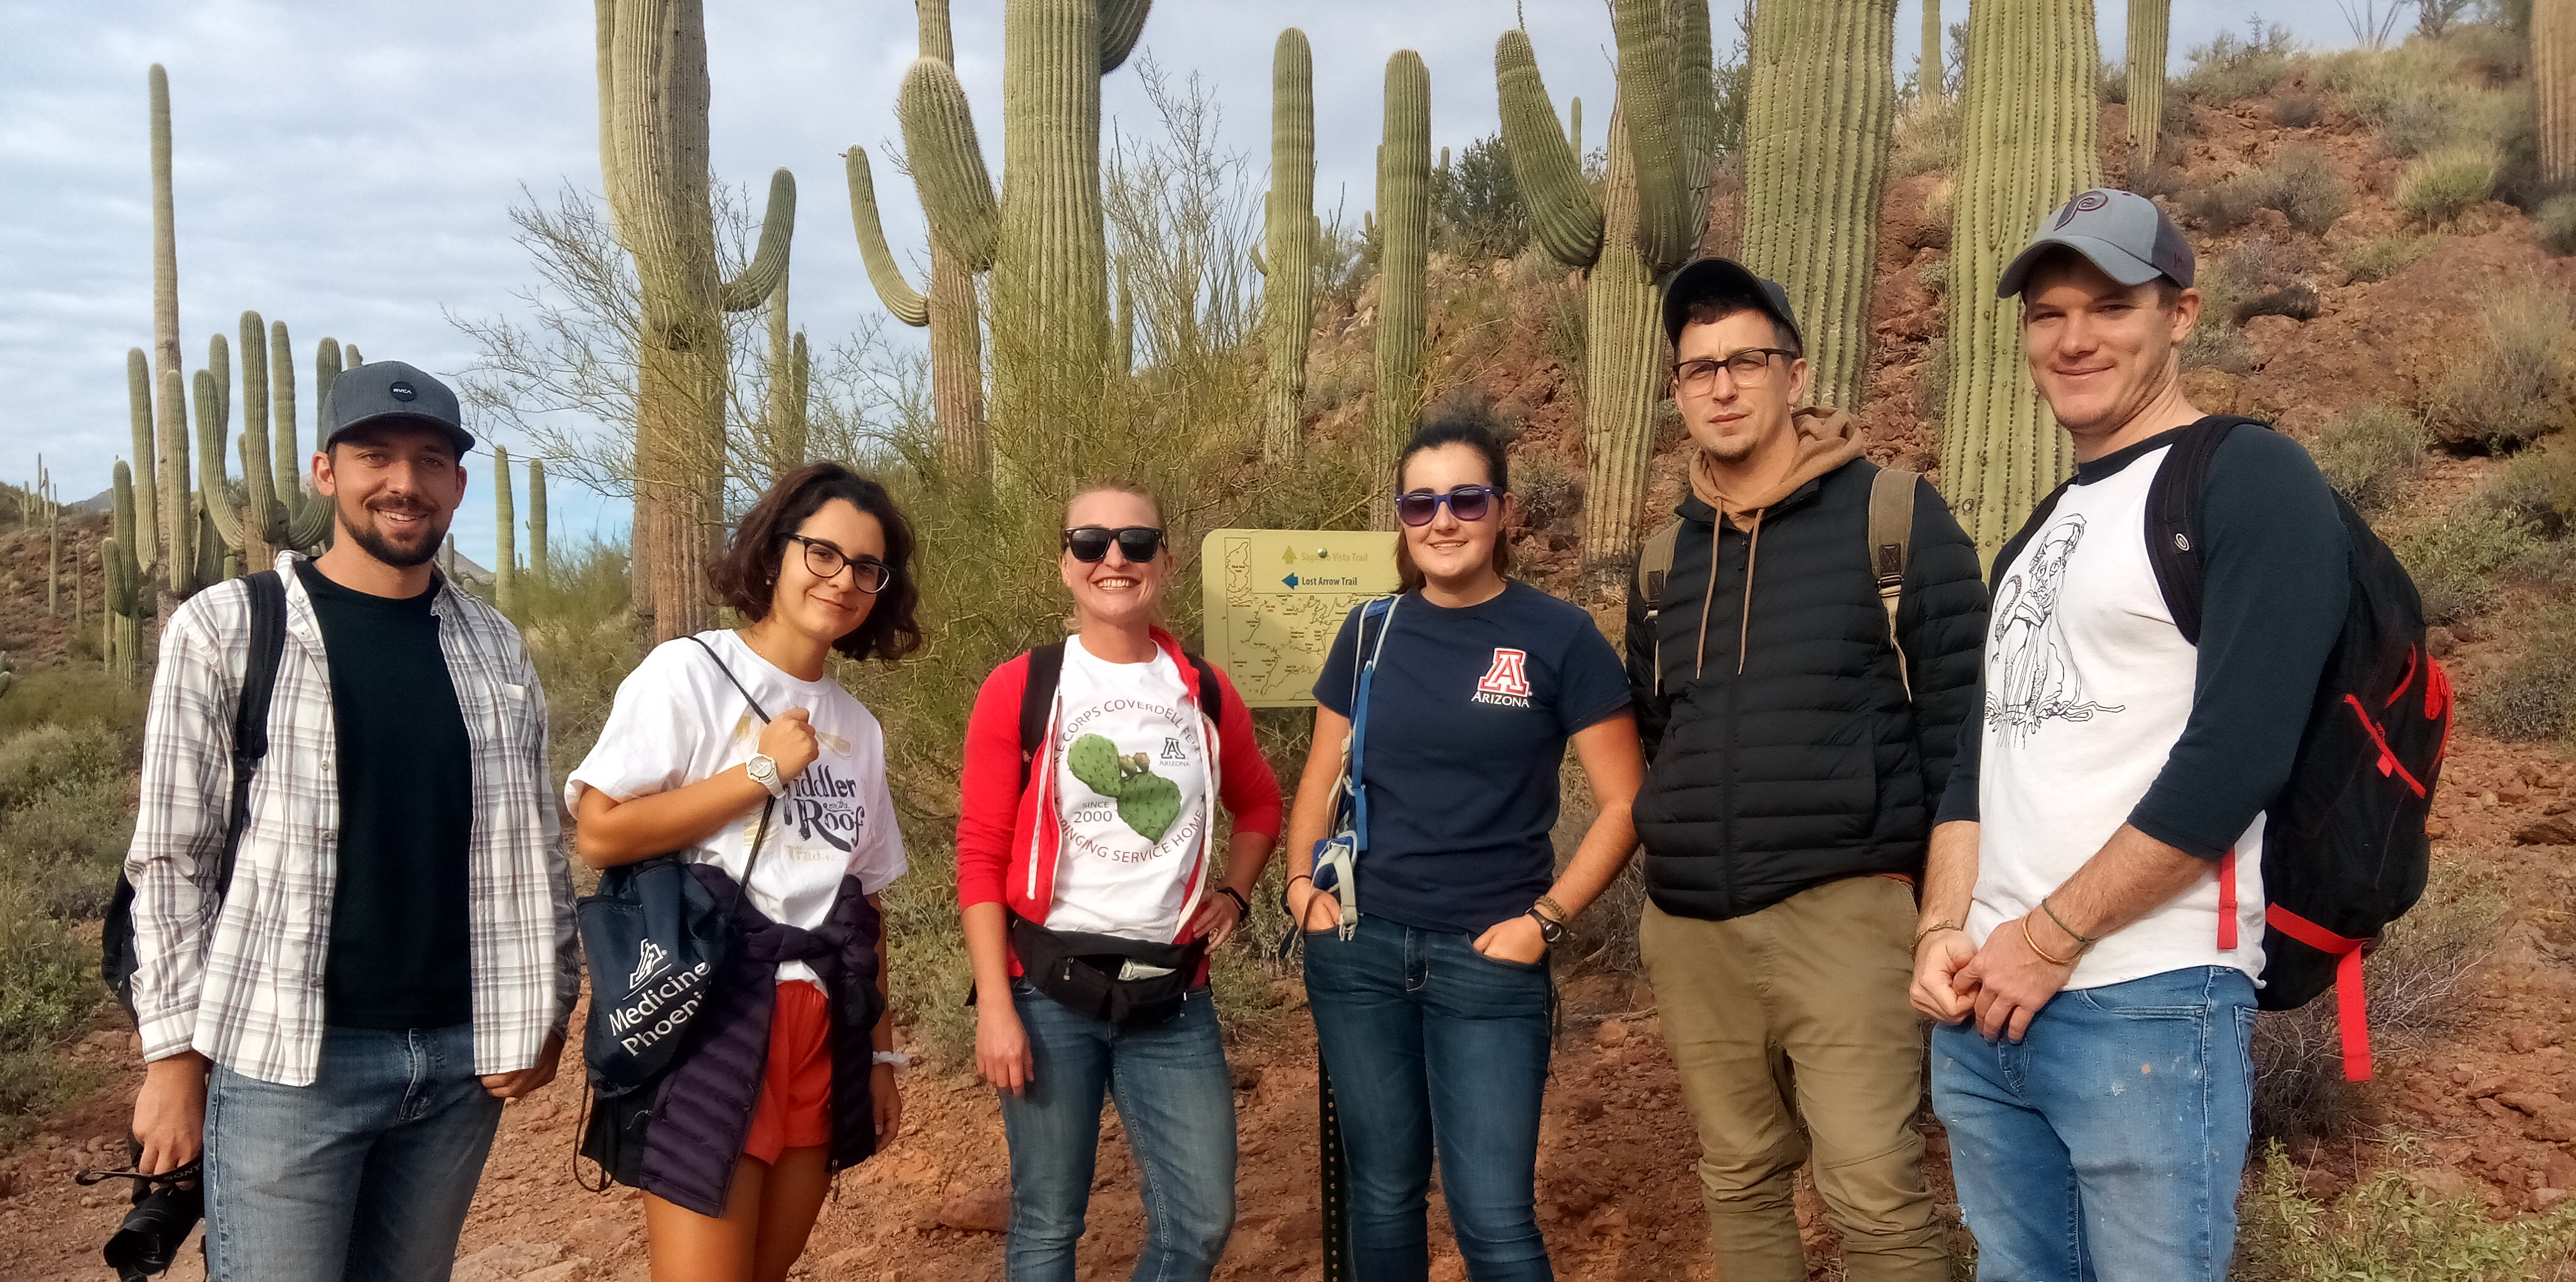 UArizona Peace Corps Prep students and Coverdell fellows go for a hike at Sweetwater trail 2019